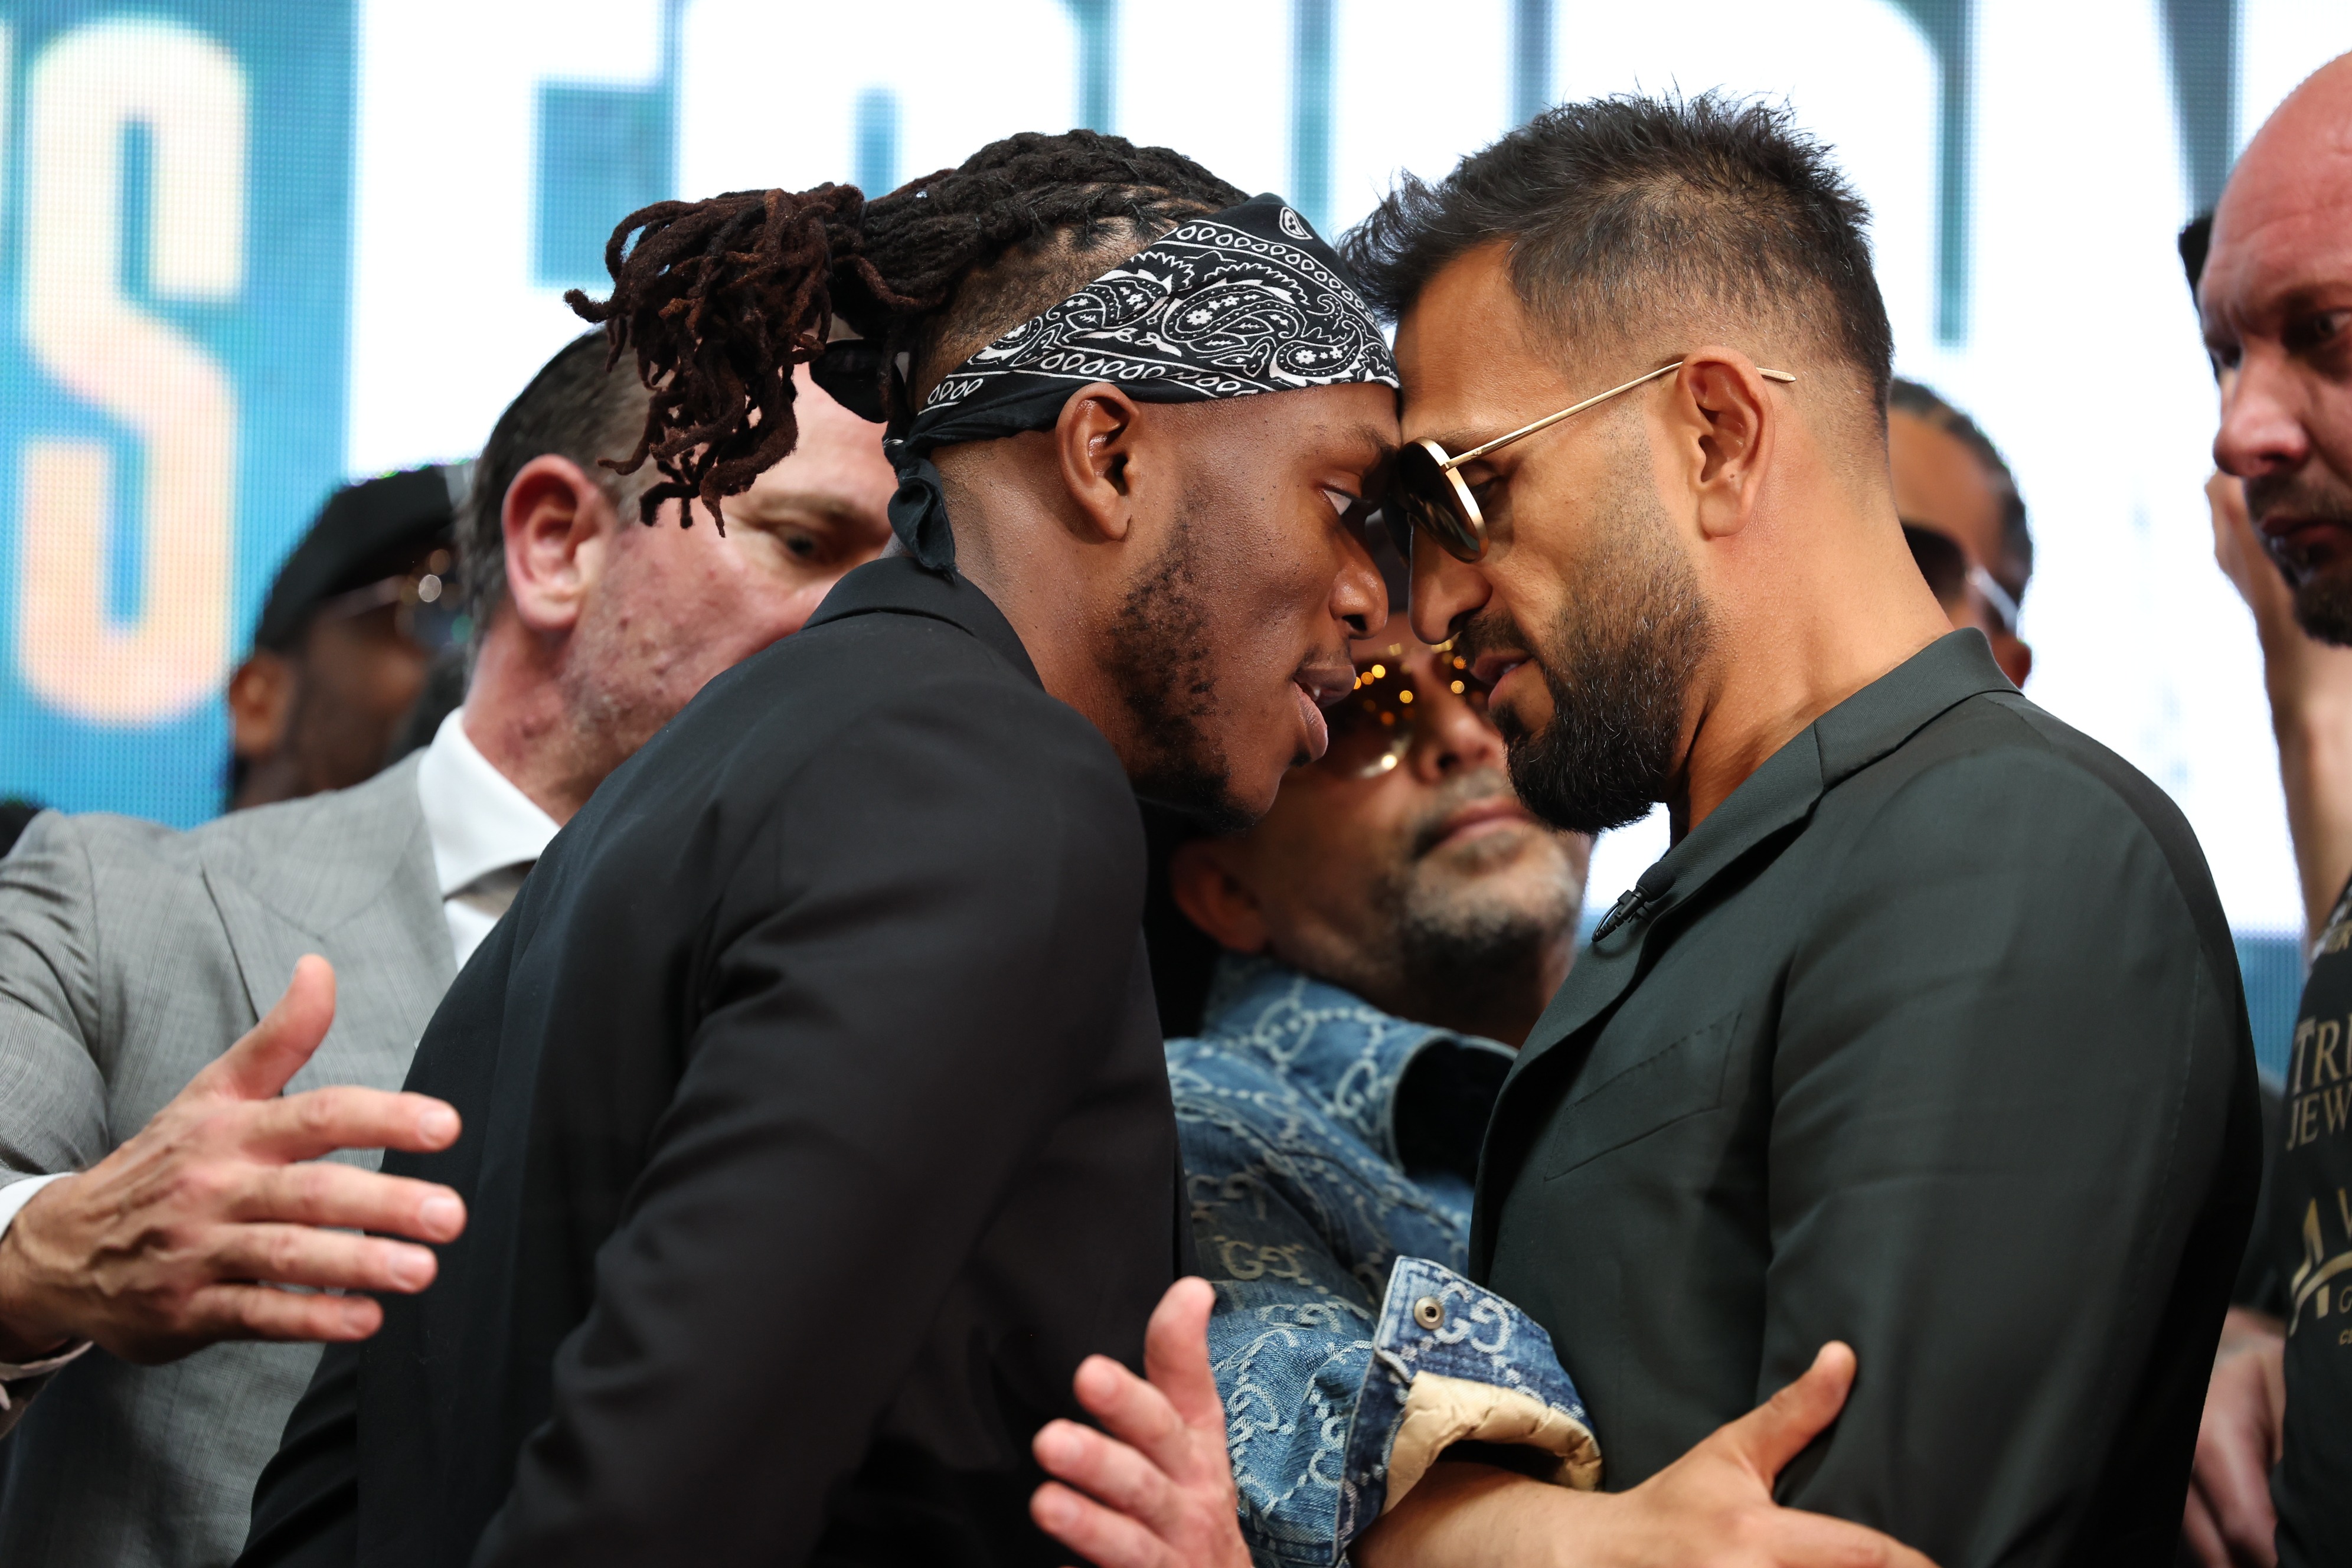 LONDON MAY 11: MF & DAZN X SERIES: 007 Press Conference at The Drum, Wembley Park, London on the 11th May 2023. Misfits Boxing. Credit: Leigh Dawney/Misfits Boxing.